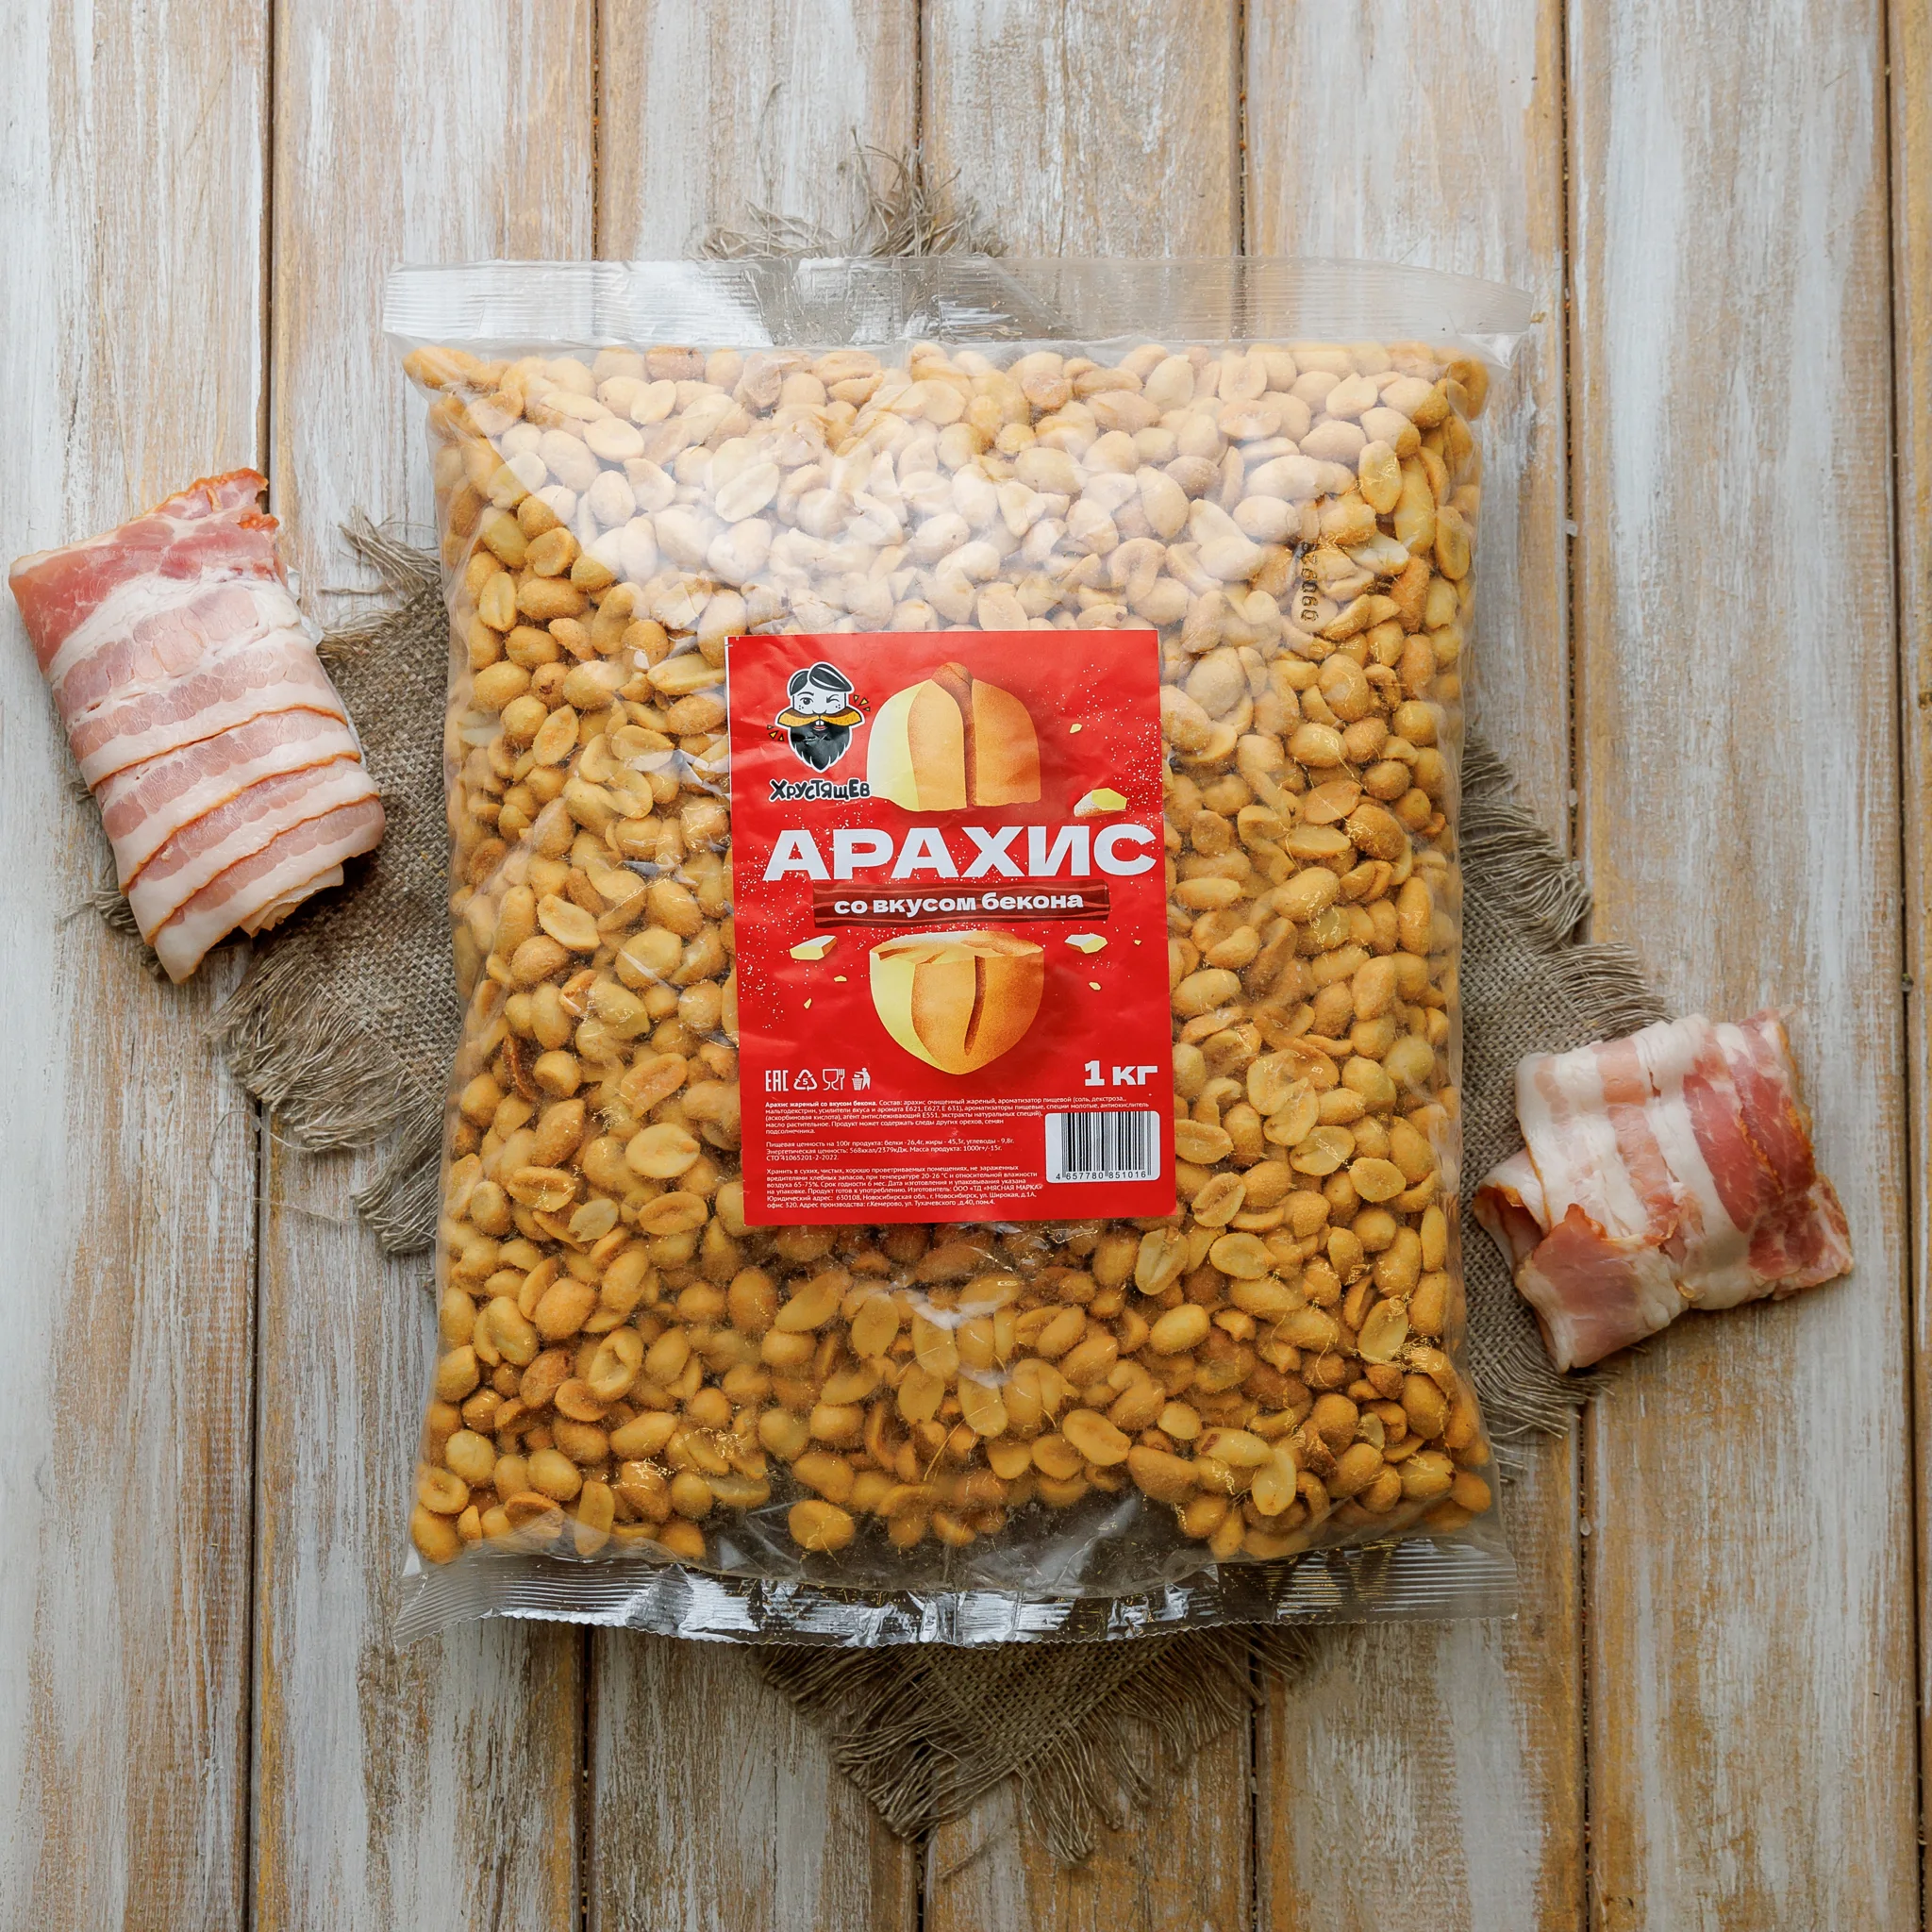 Roasted peeled peanuts with bacon flavor 1000g/Snacks/Nuts